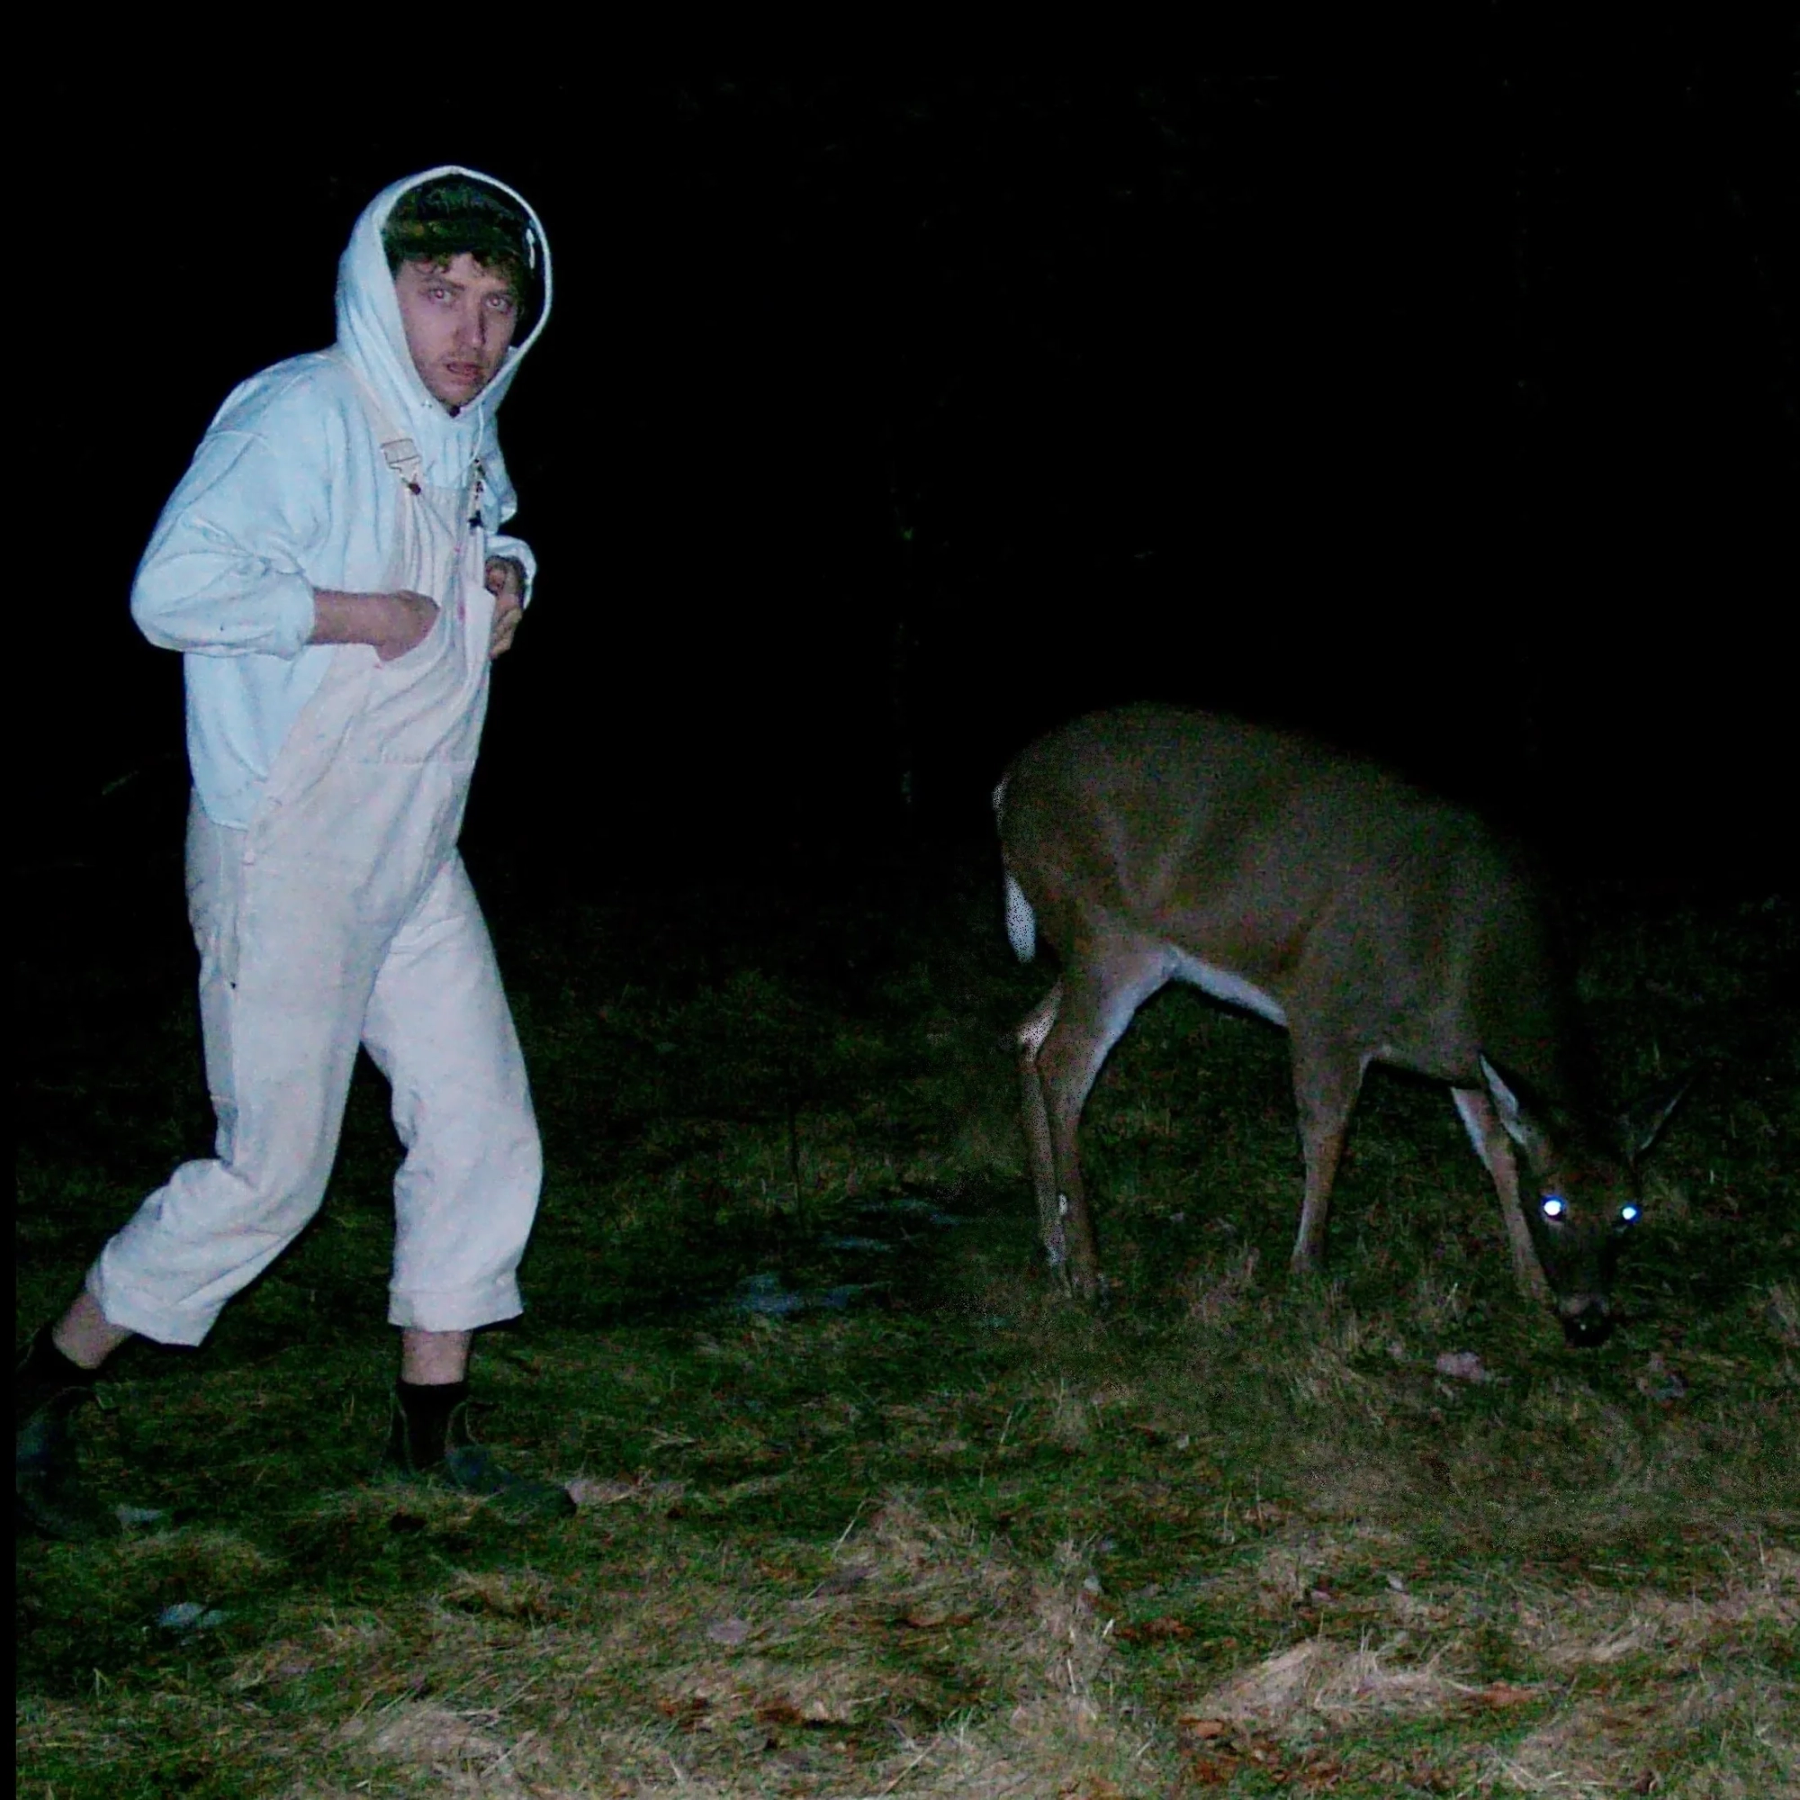 A photograph of a person in a white hoodie and white overalls next to a deer eating grass with shining eyes at night.